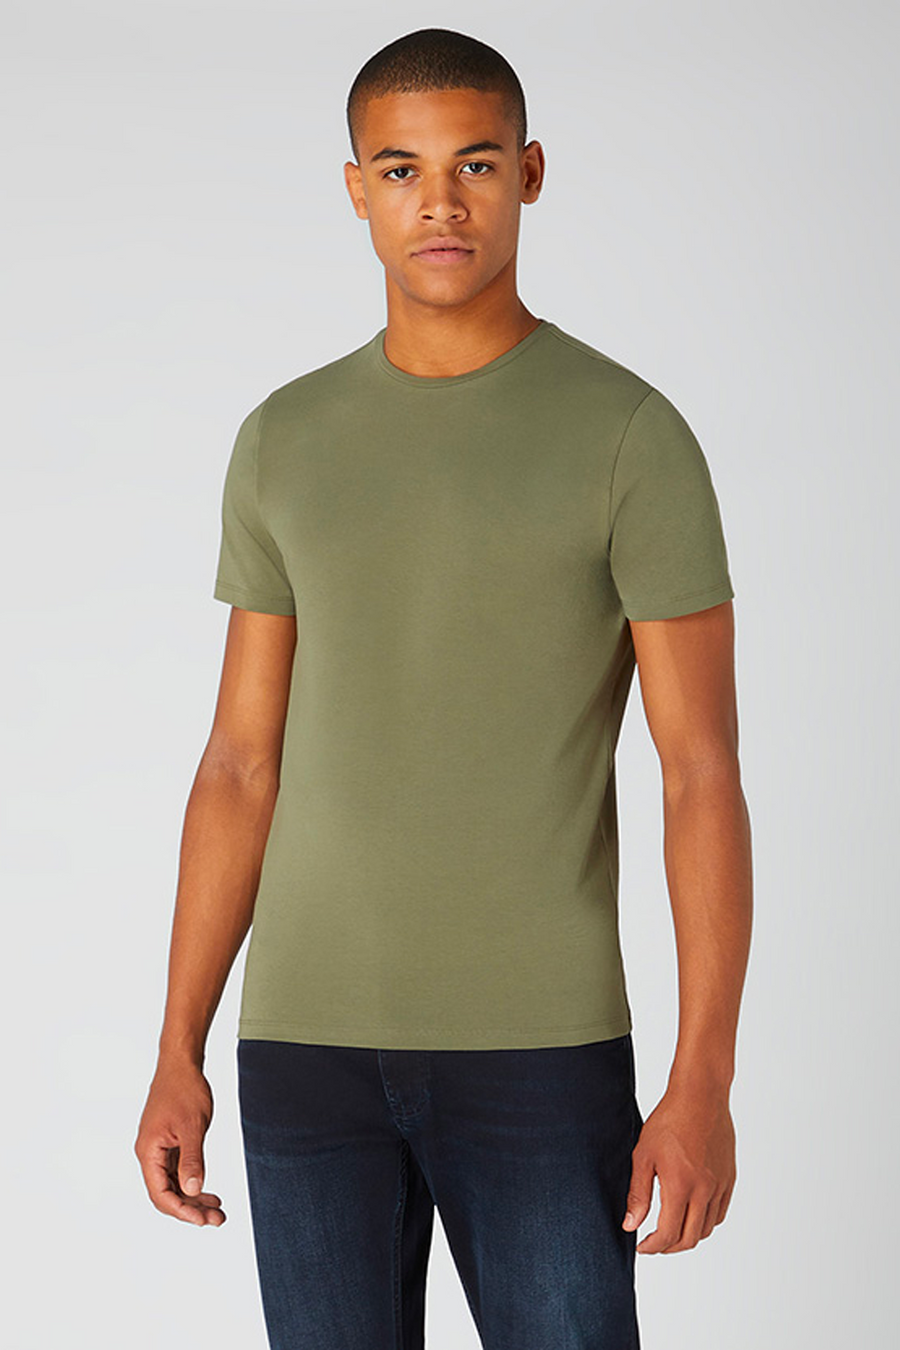 Buy the Remus Uomo Basic Round Neck T-Shirt Olive at Intro. Spend £50 for free UK delivery. Official stockists. We ship worldwide.